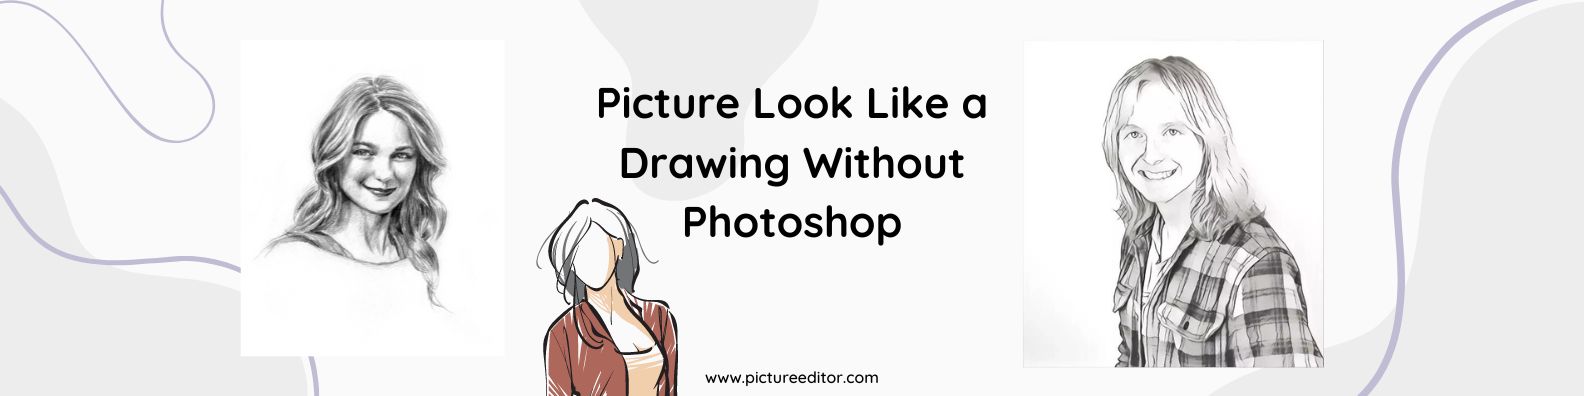 Picture Look Like a Drawing Without Photoshop